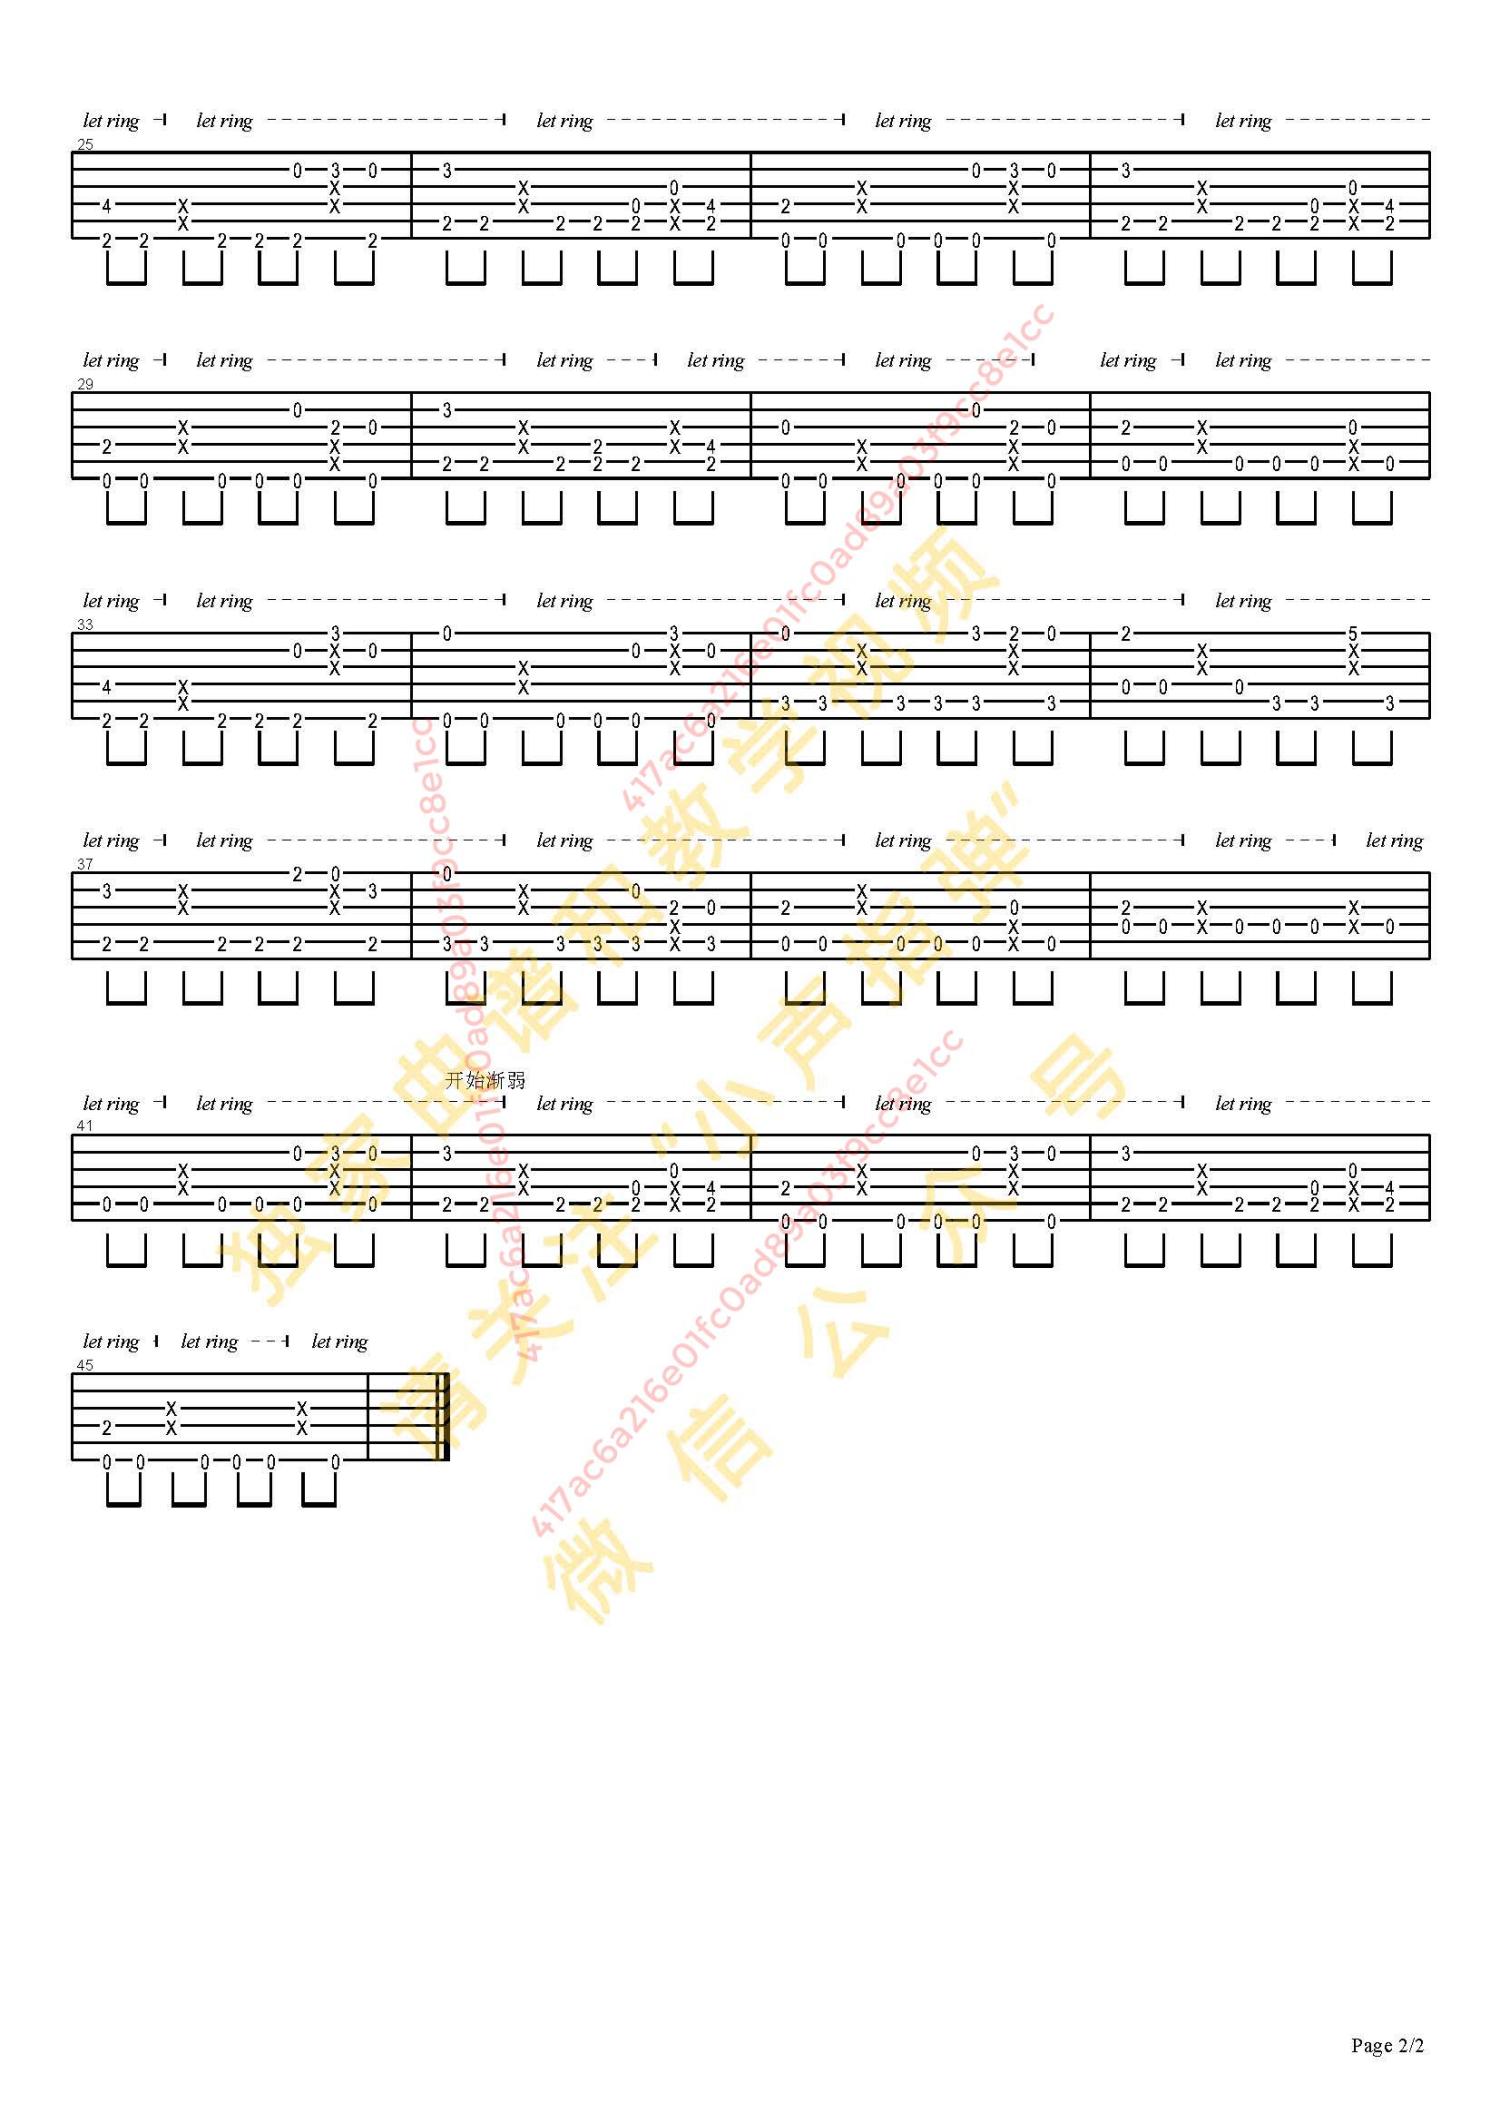 Just Your Fool by Little Walter - Guitar Lead Sheet - Guitar Instructor